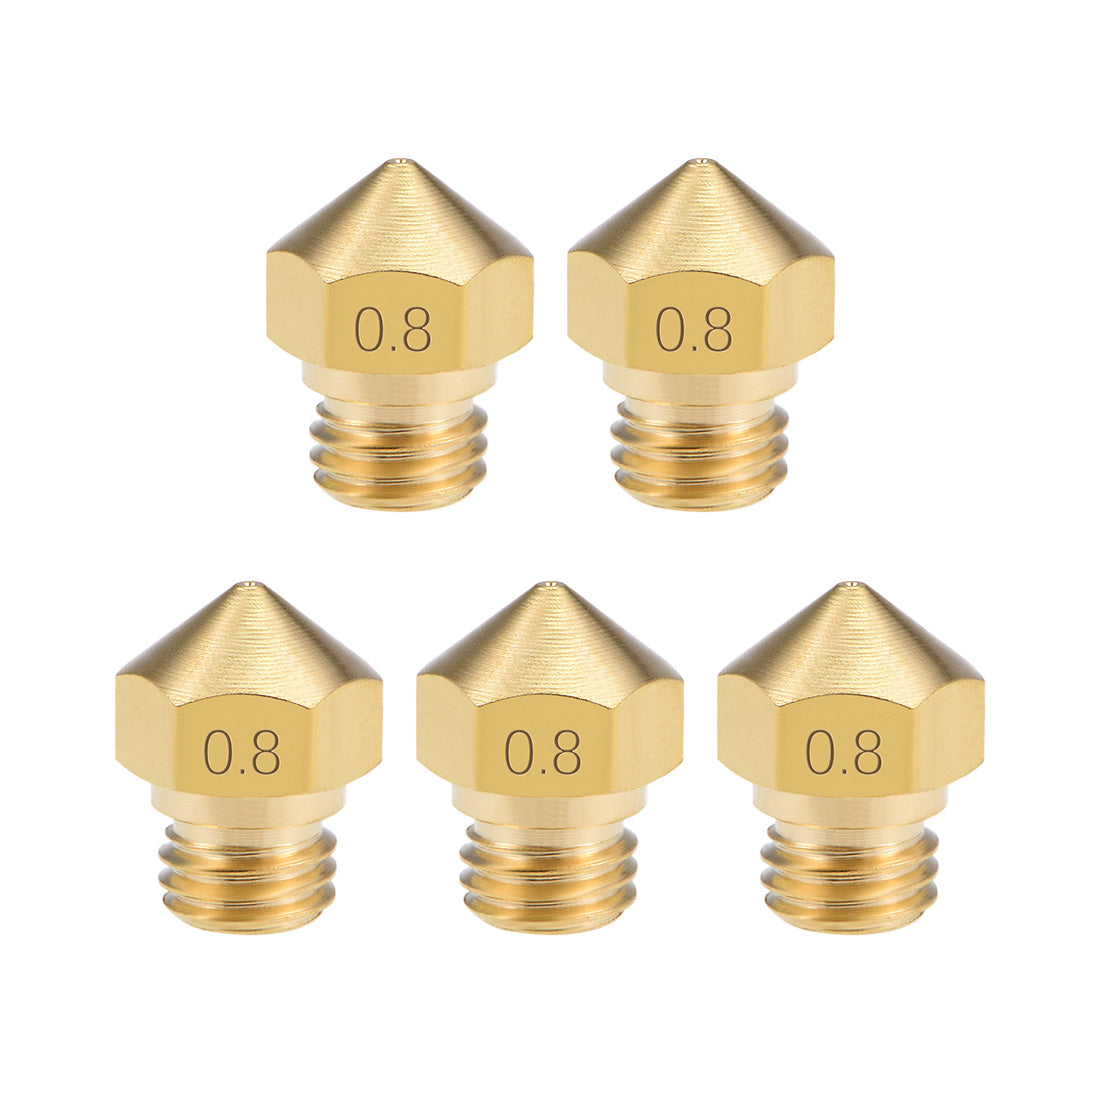 uxcell Uxcell 0.8mm 3D Printer Nozzle Head M7 Thread Replacement for MK10 1.75mm Extruder Print, Brass 5pcs